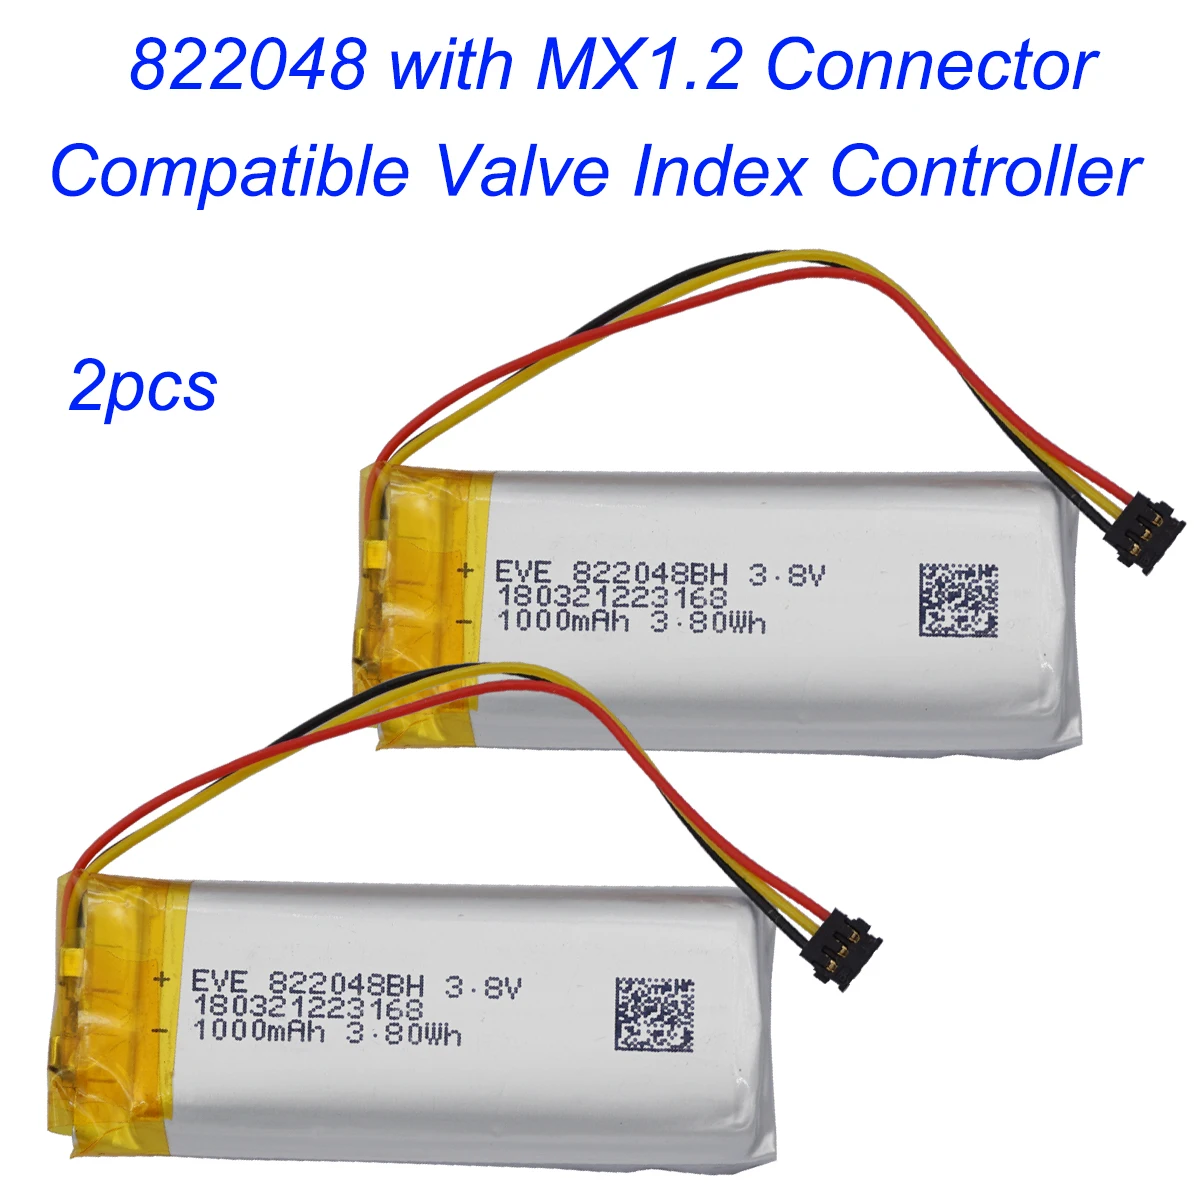 2pcs 3.8V 1000mAh 822048 Thermistor 3 Wires Polymer Li Lipo Battery 3Pin MX1.2 Connector Compatible For Valve Index Controller